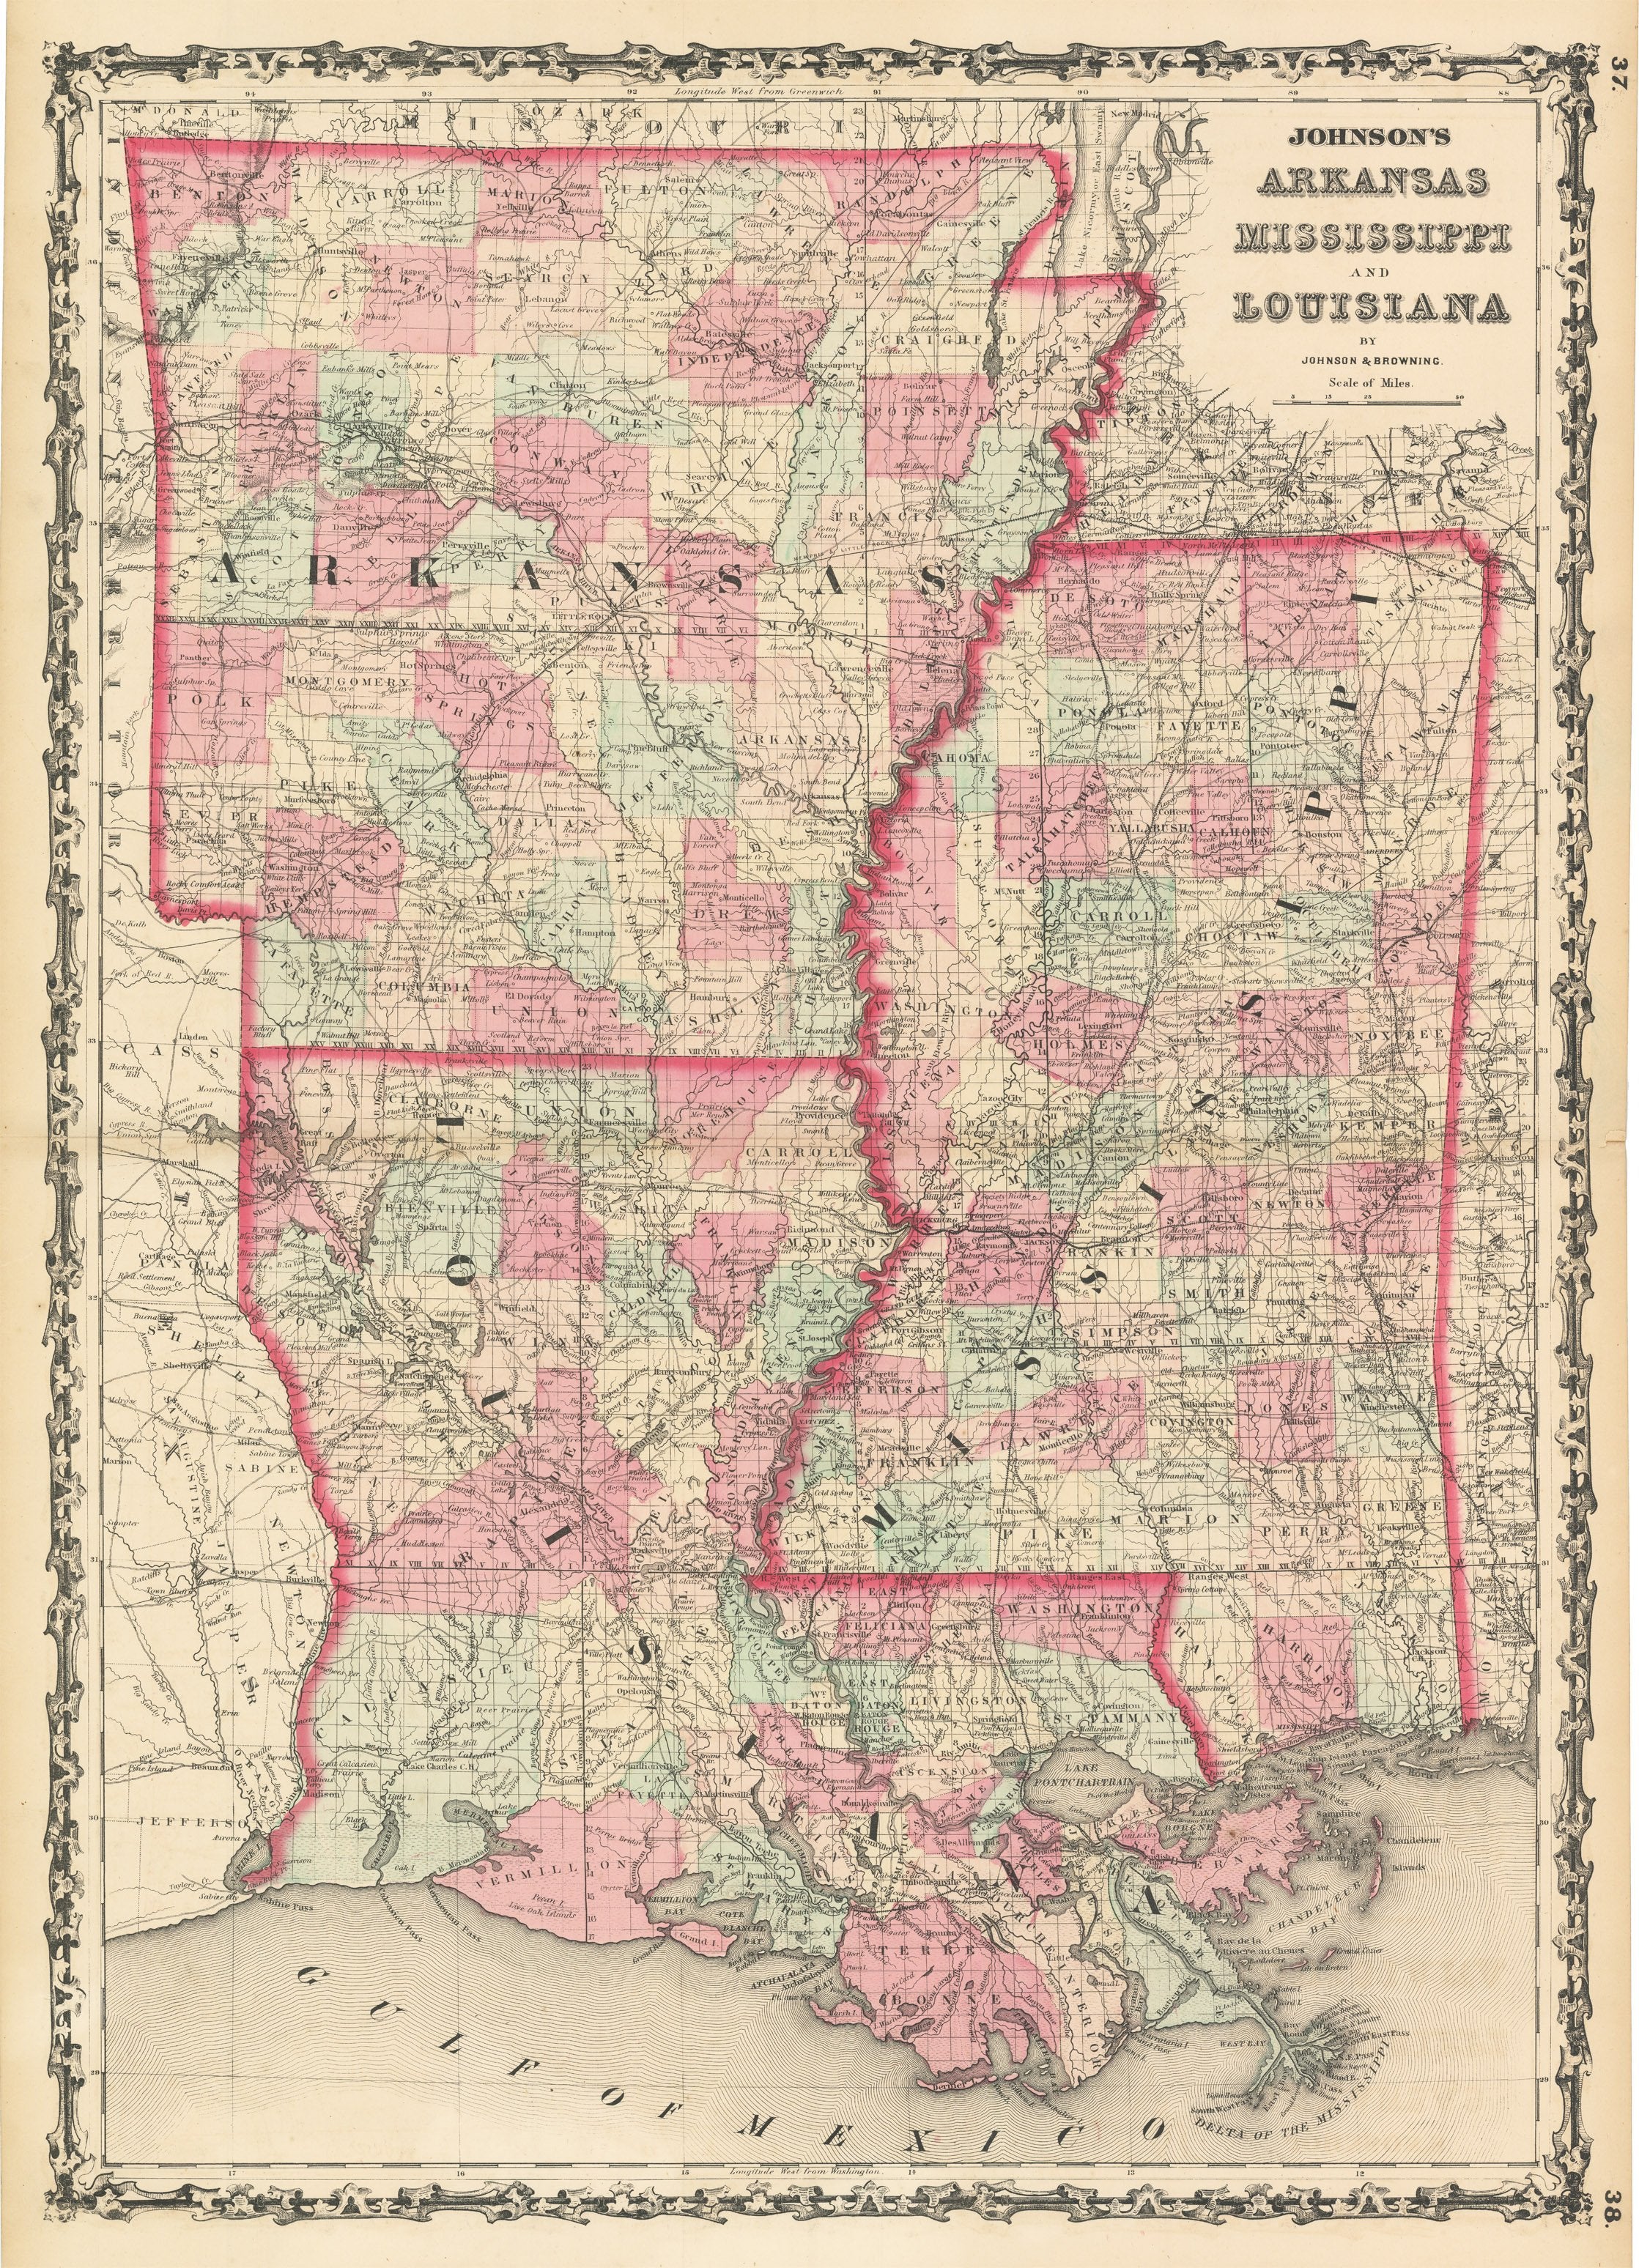 Arkansas, Louisiana and Mississippi, Road and Tourist Map, America.